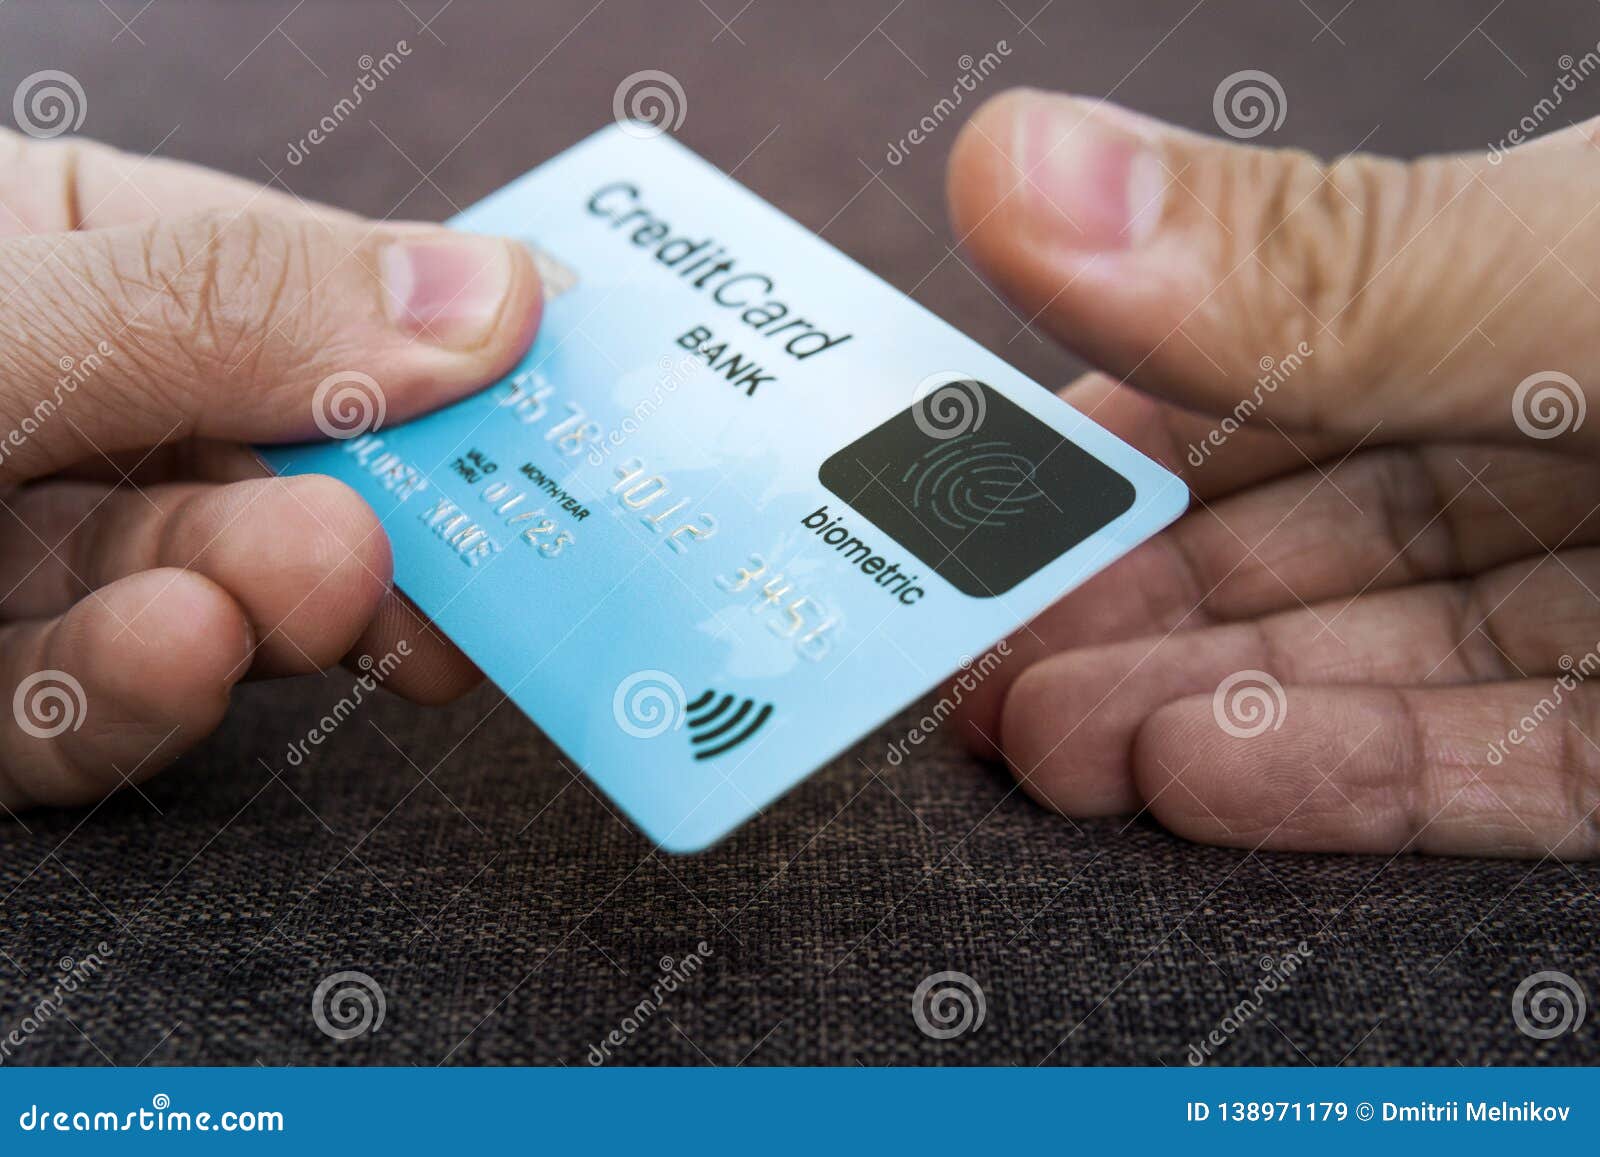 credit card has built-in fingerprint scanner.  of biometric payment security. one male hand is holding blue card and